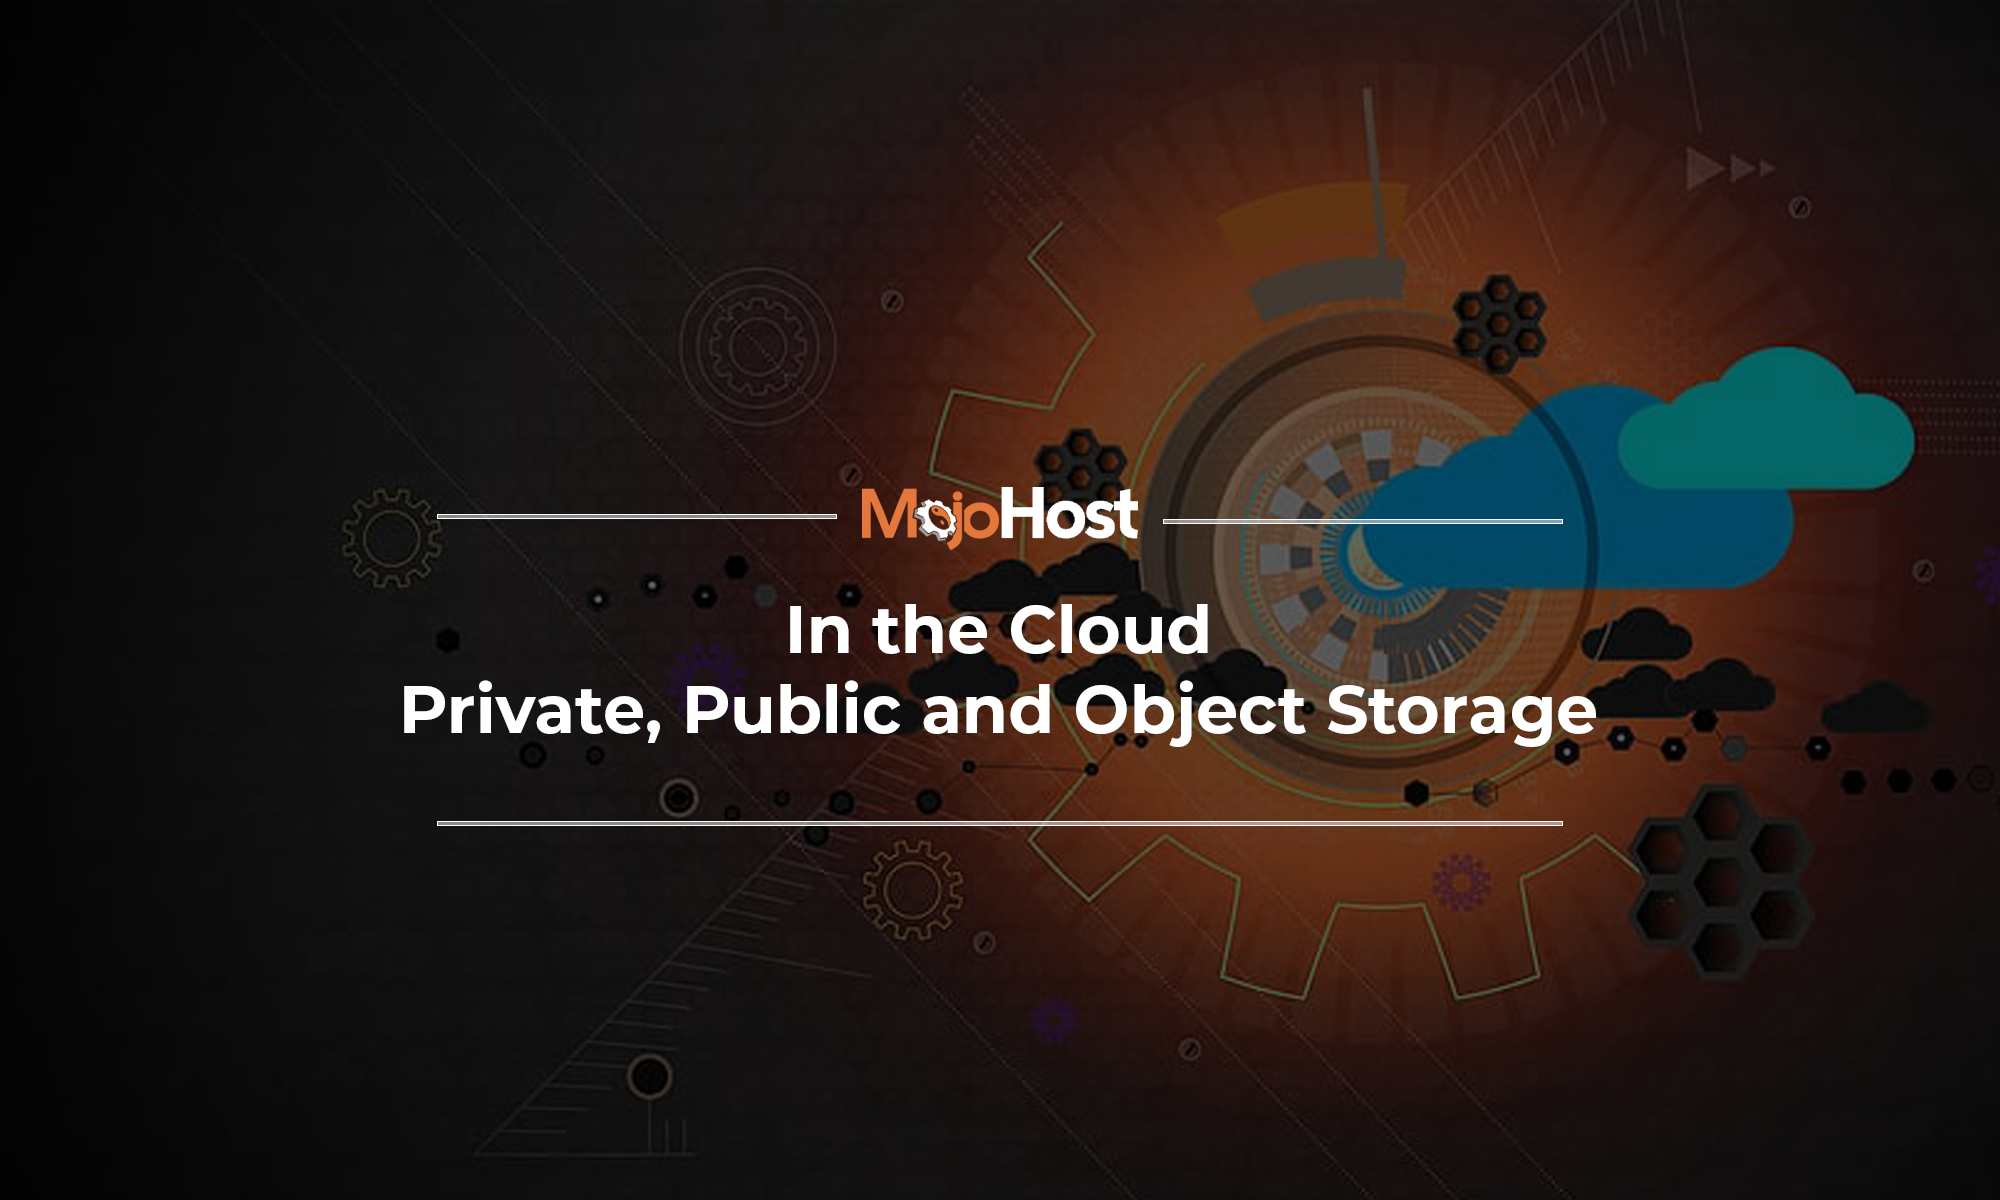 In the Cloud: Private, Public and Object Storage